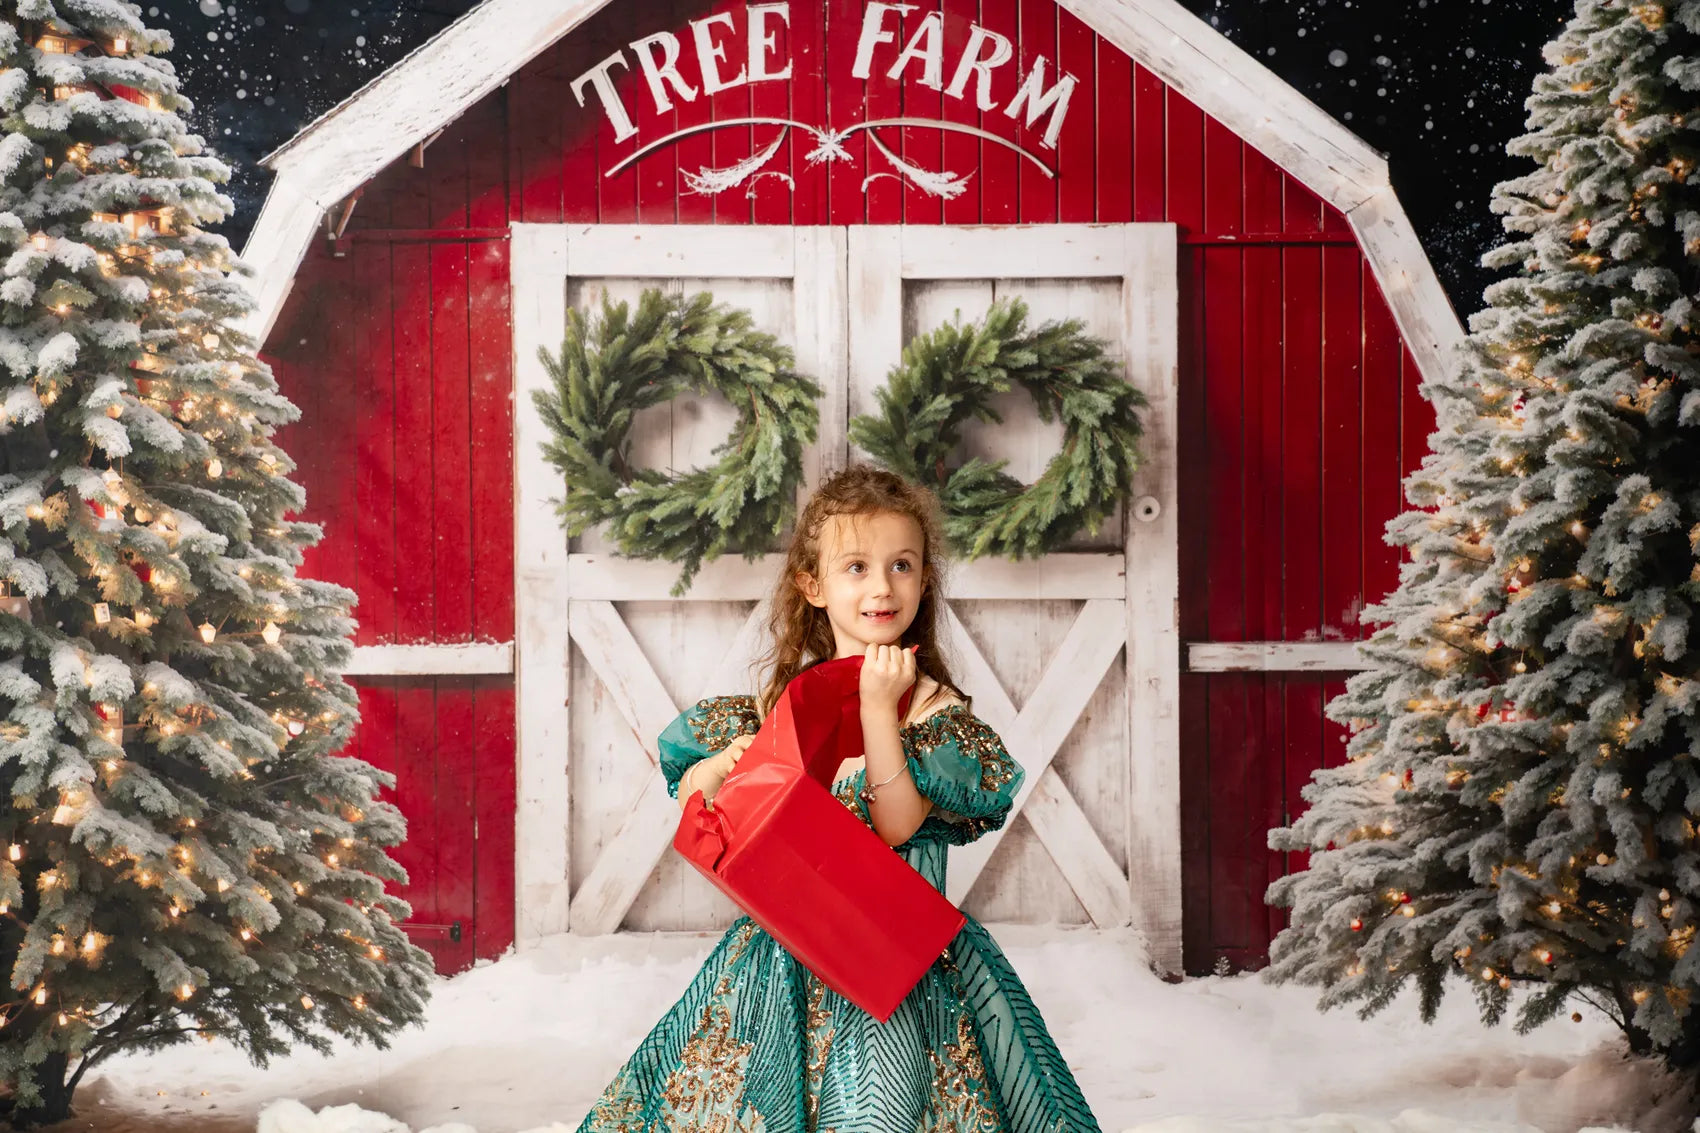 RTS Kate Winter Christmas Tree Farm Red Barn Backdrop Designed by Chain Photography